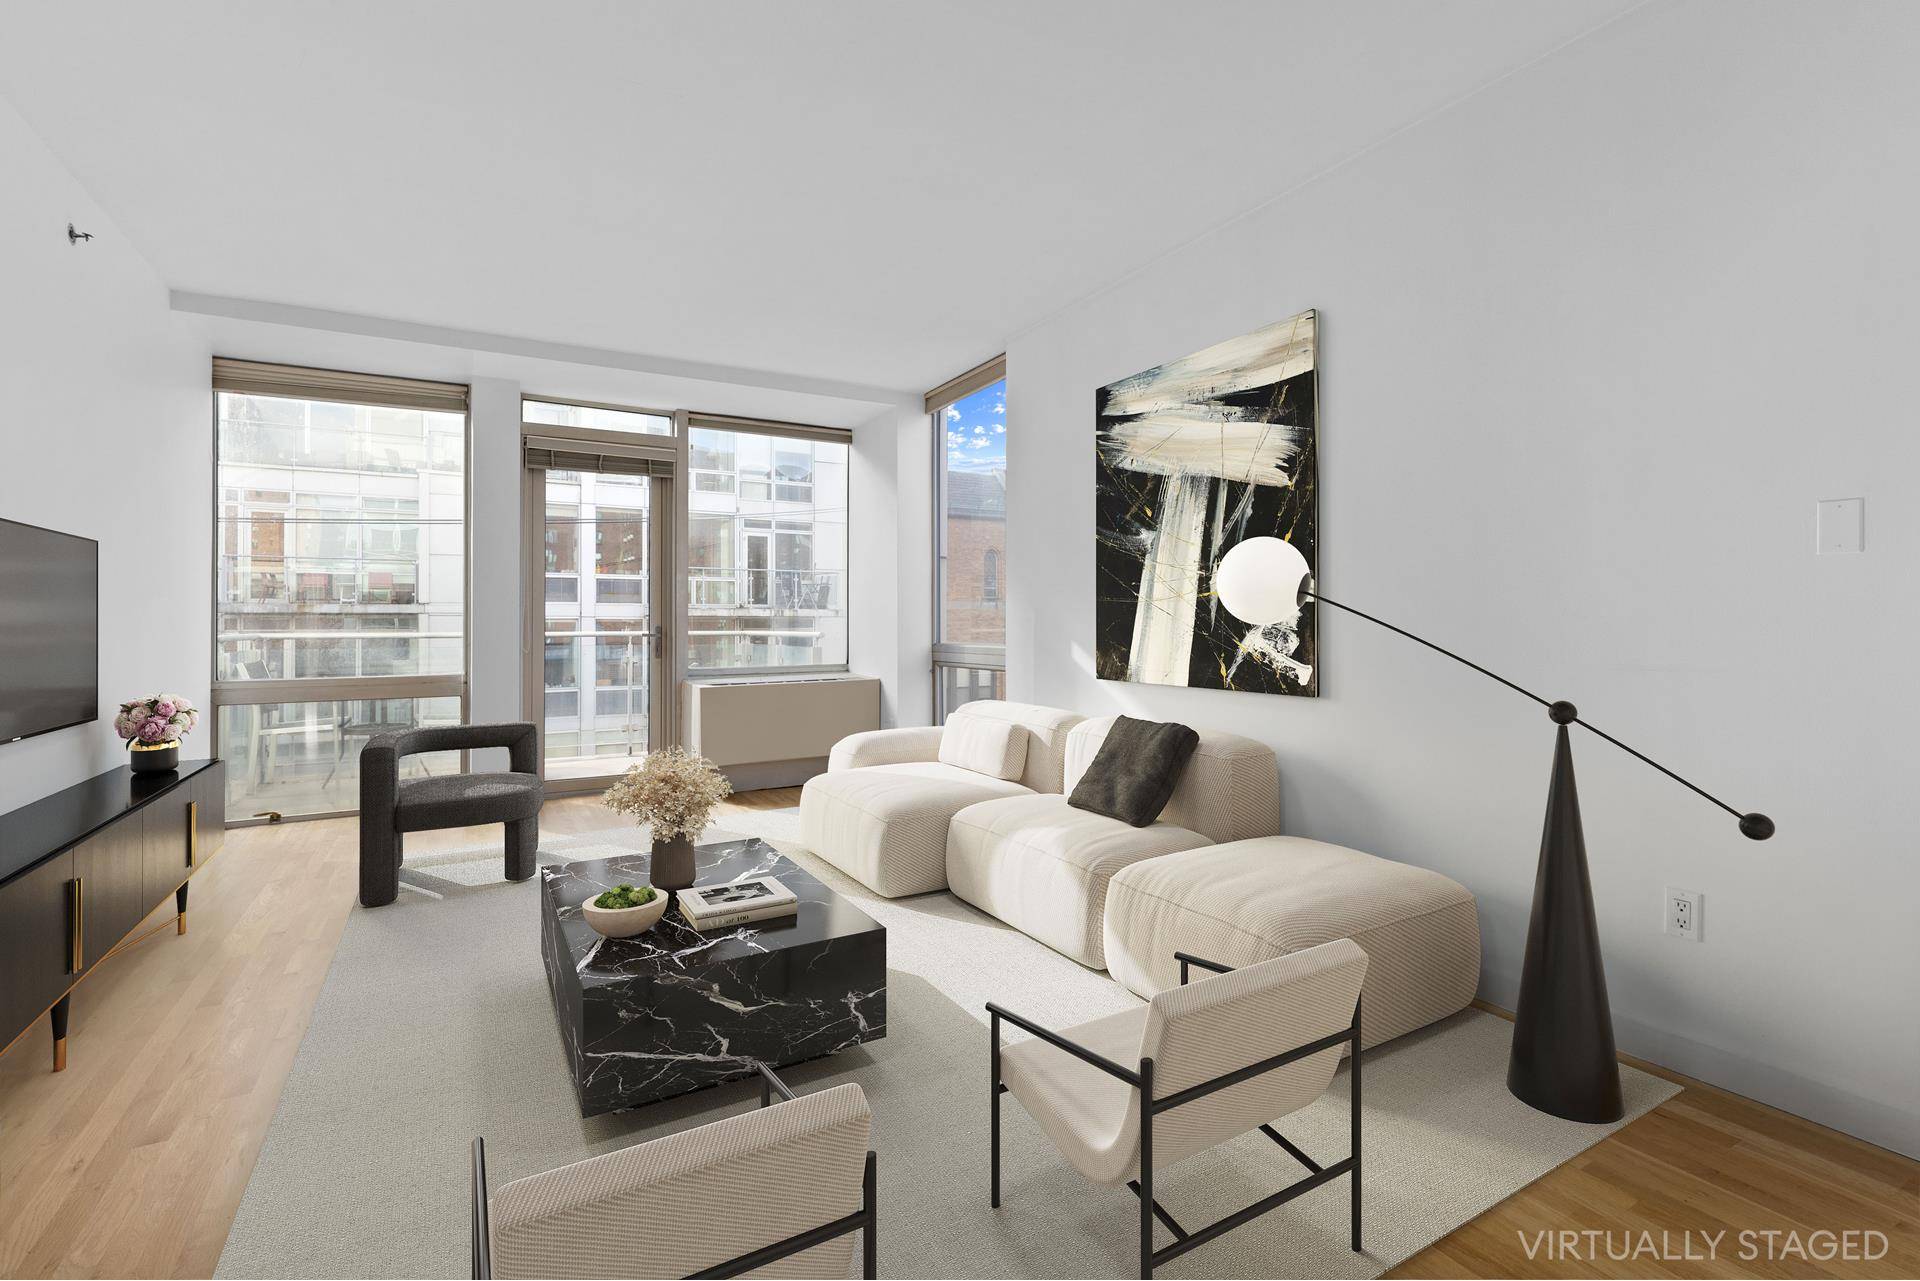 Discover perfection in this double exposed, One Bedroom sanctuary at The A Building Condominium.